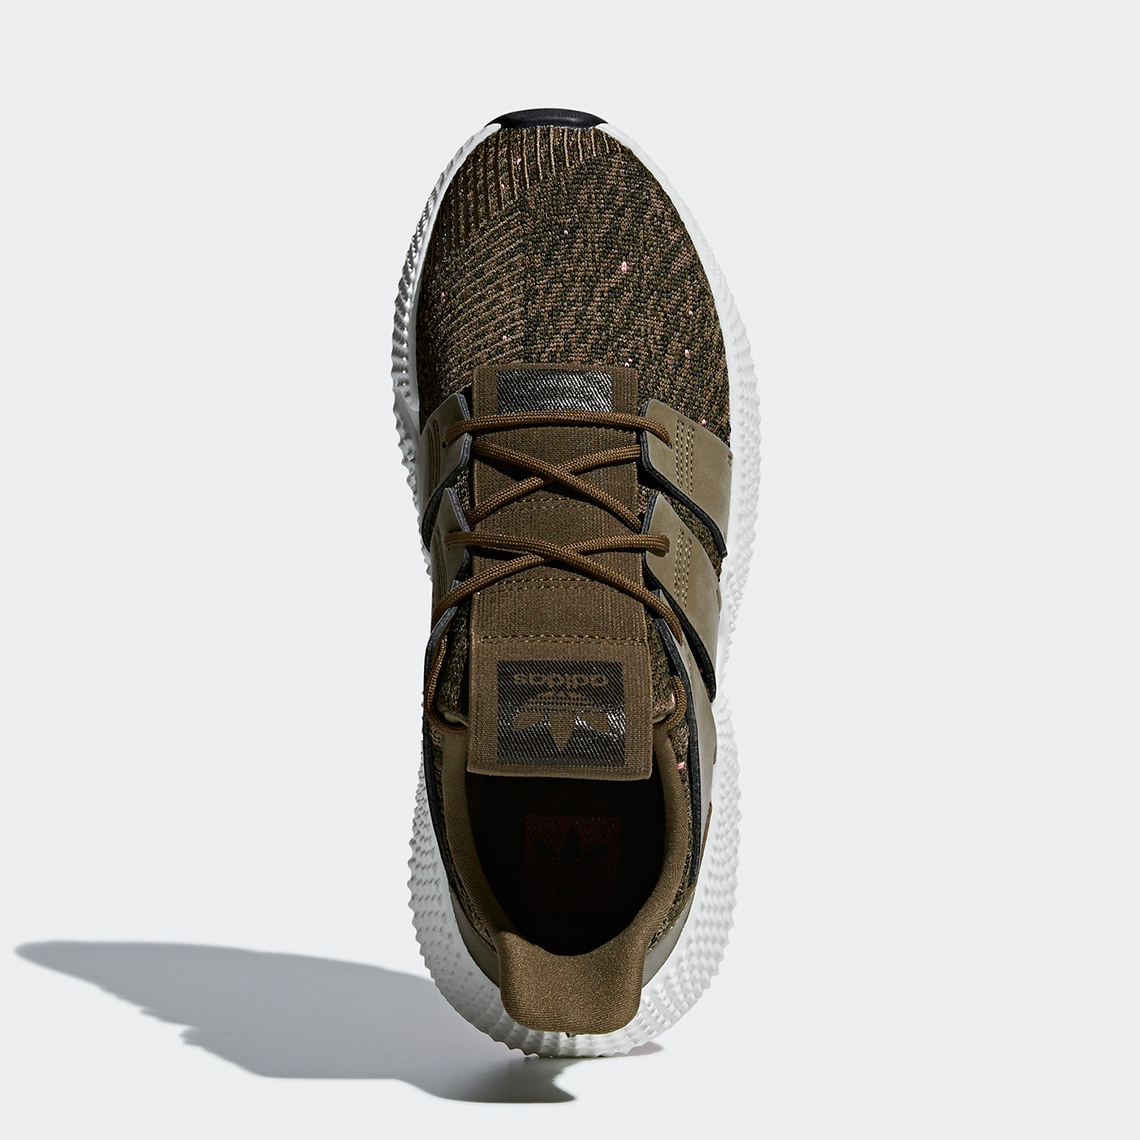 Adidas Prophere Trace Olive Coming Soon 3